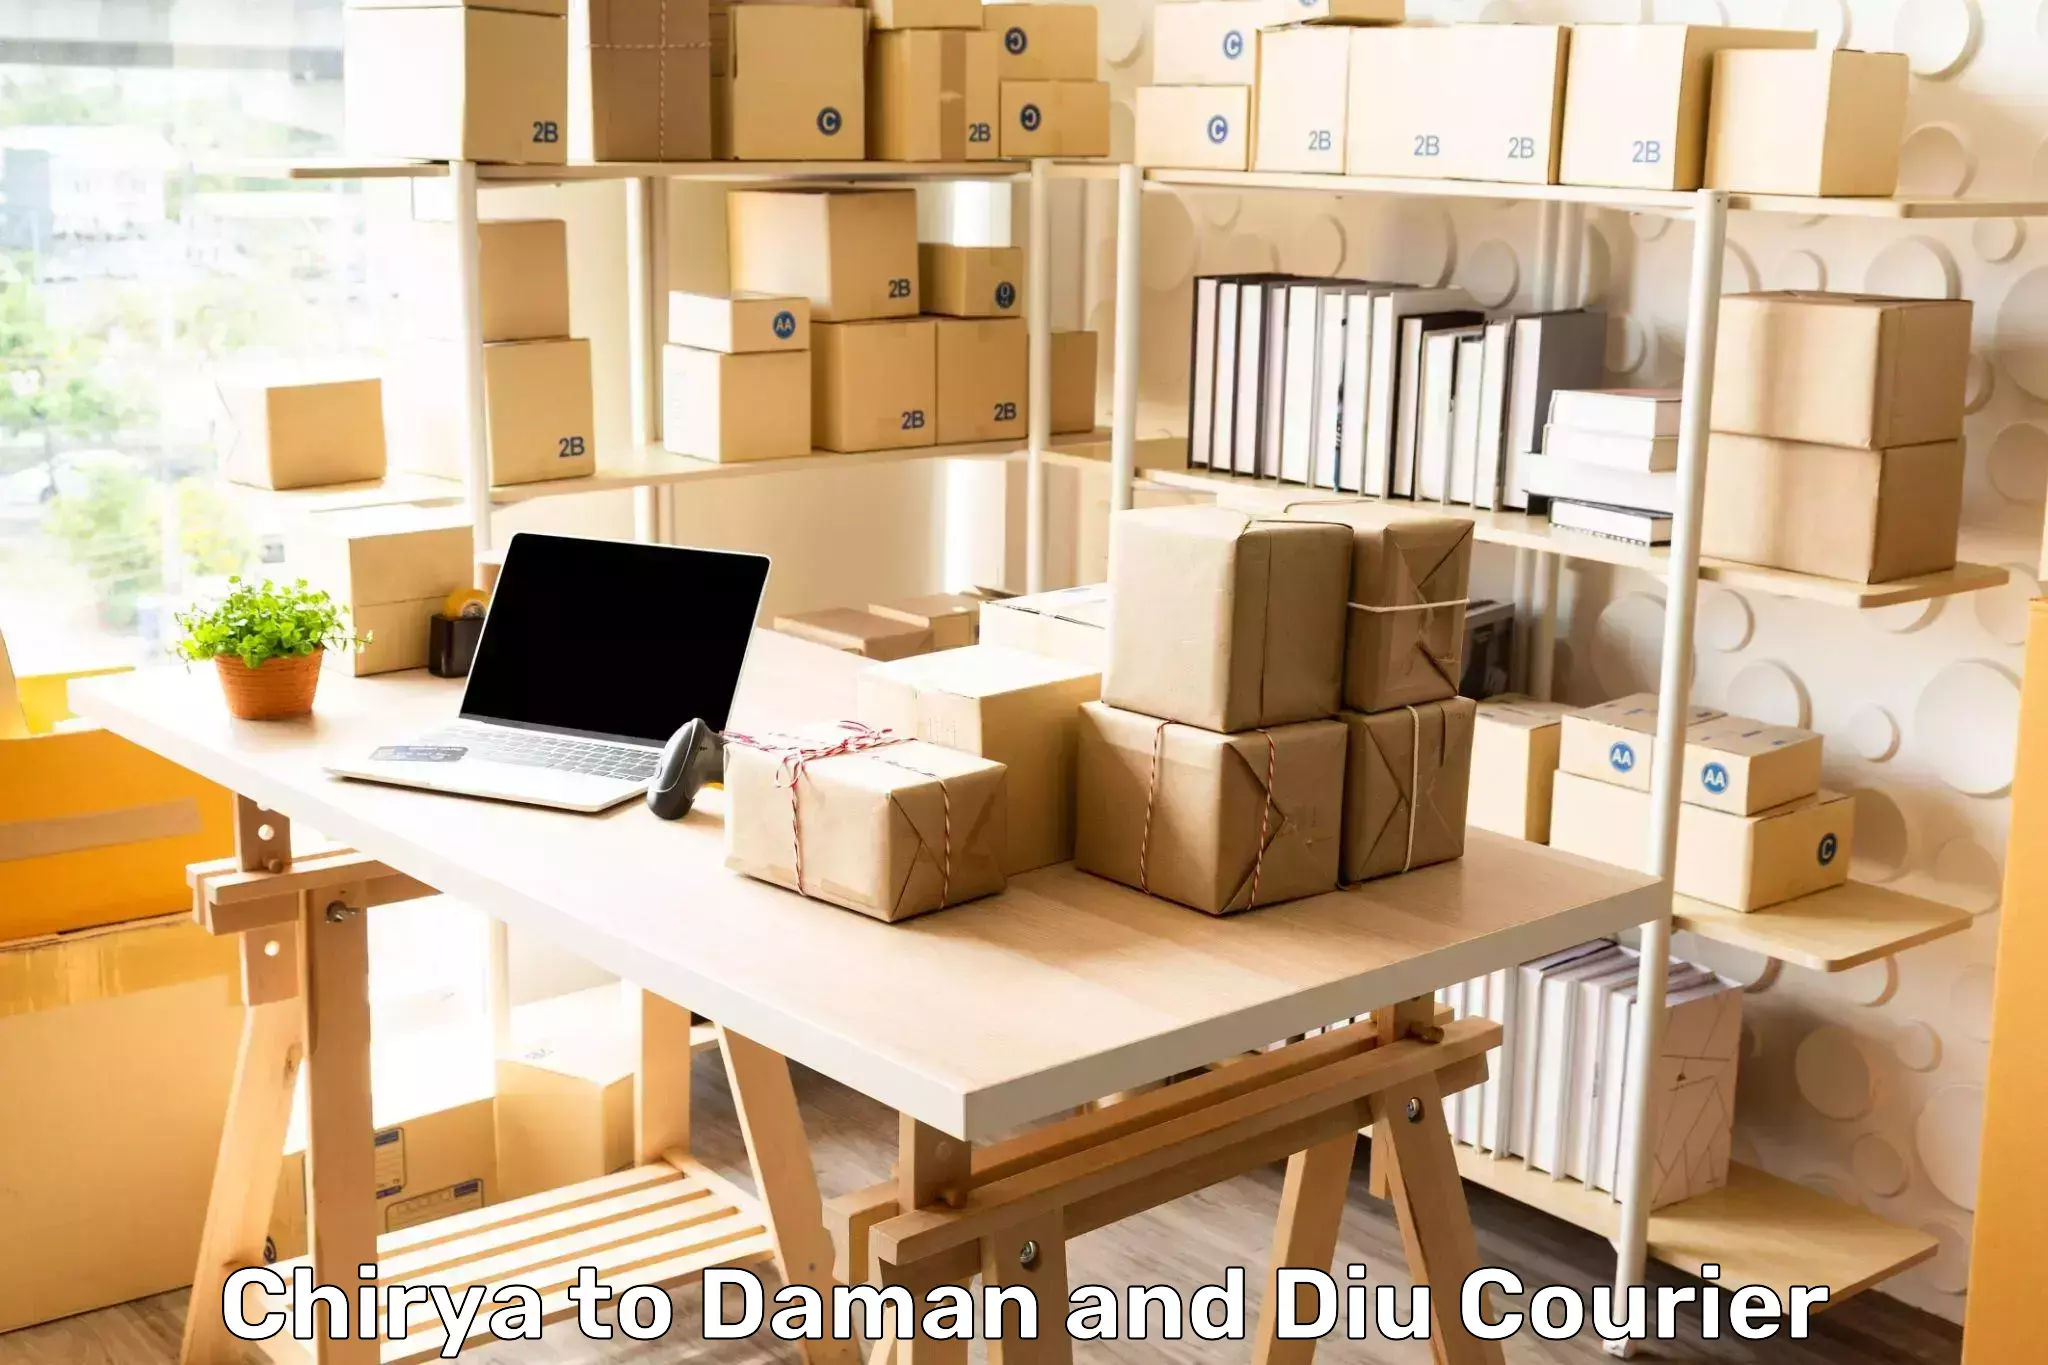 Automated parcel services Chirya to Daman and Diu